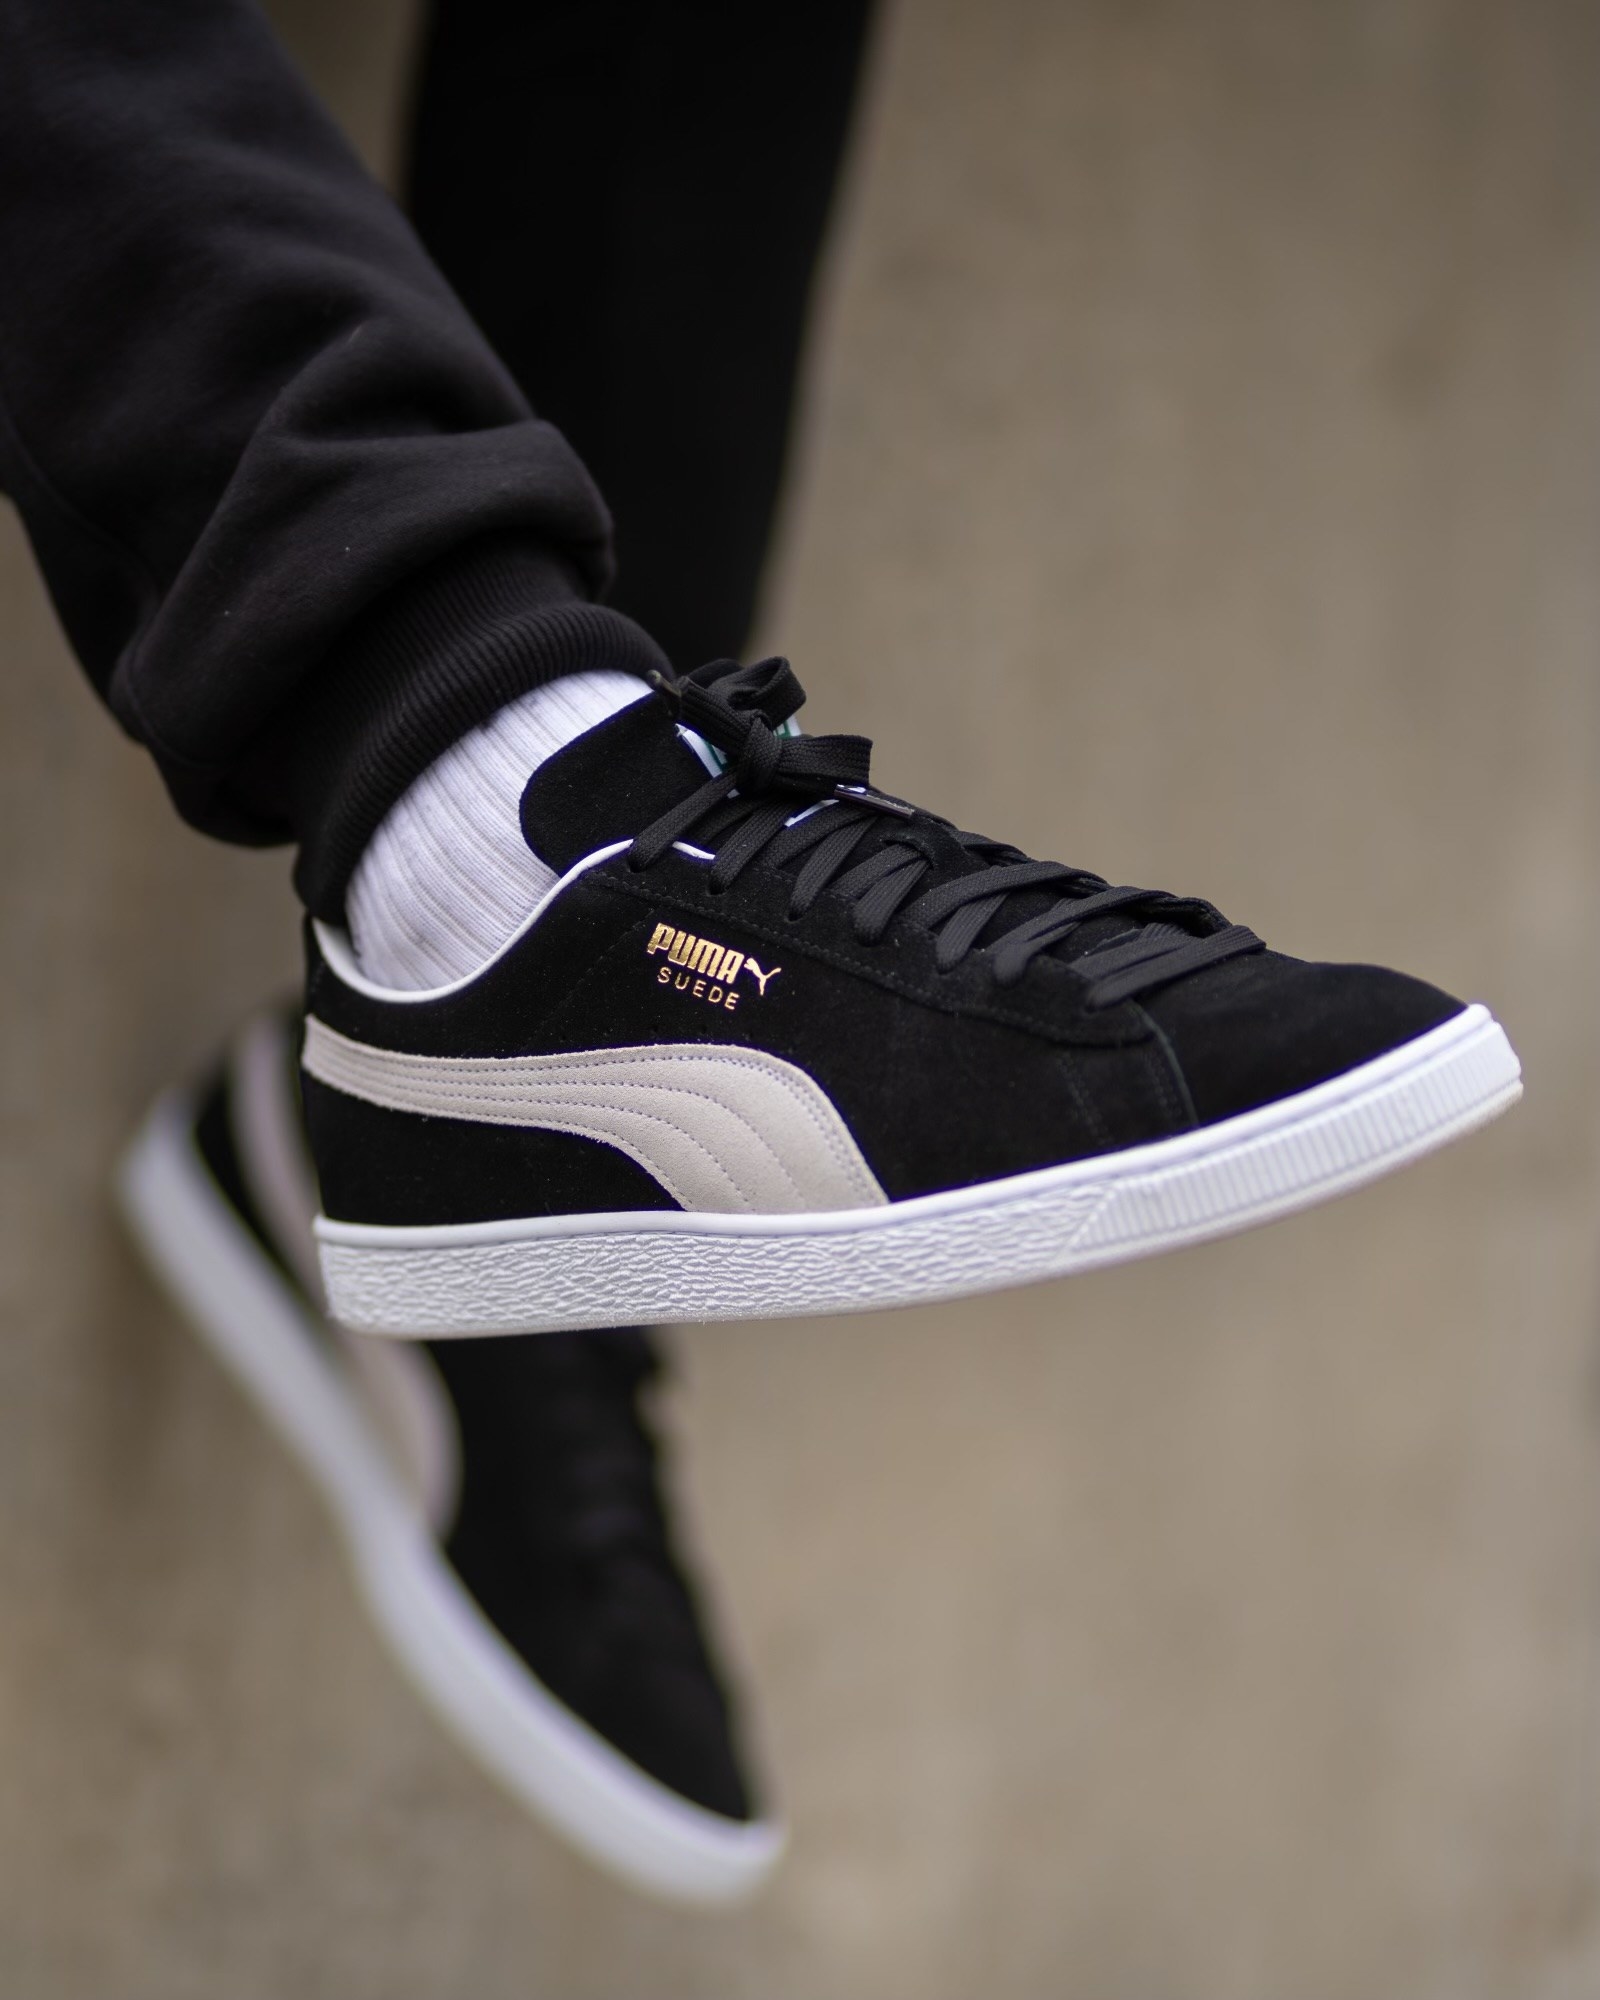 Close-up image of Puma Suede sneakers